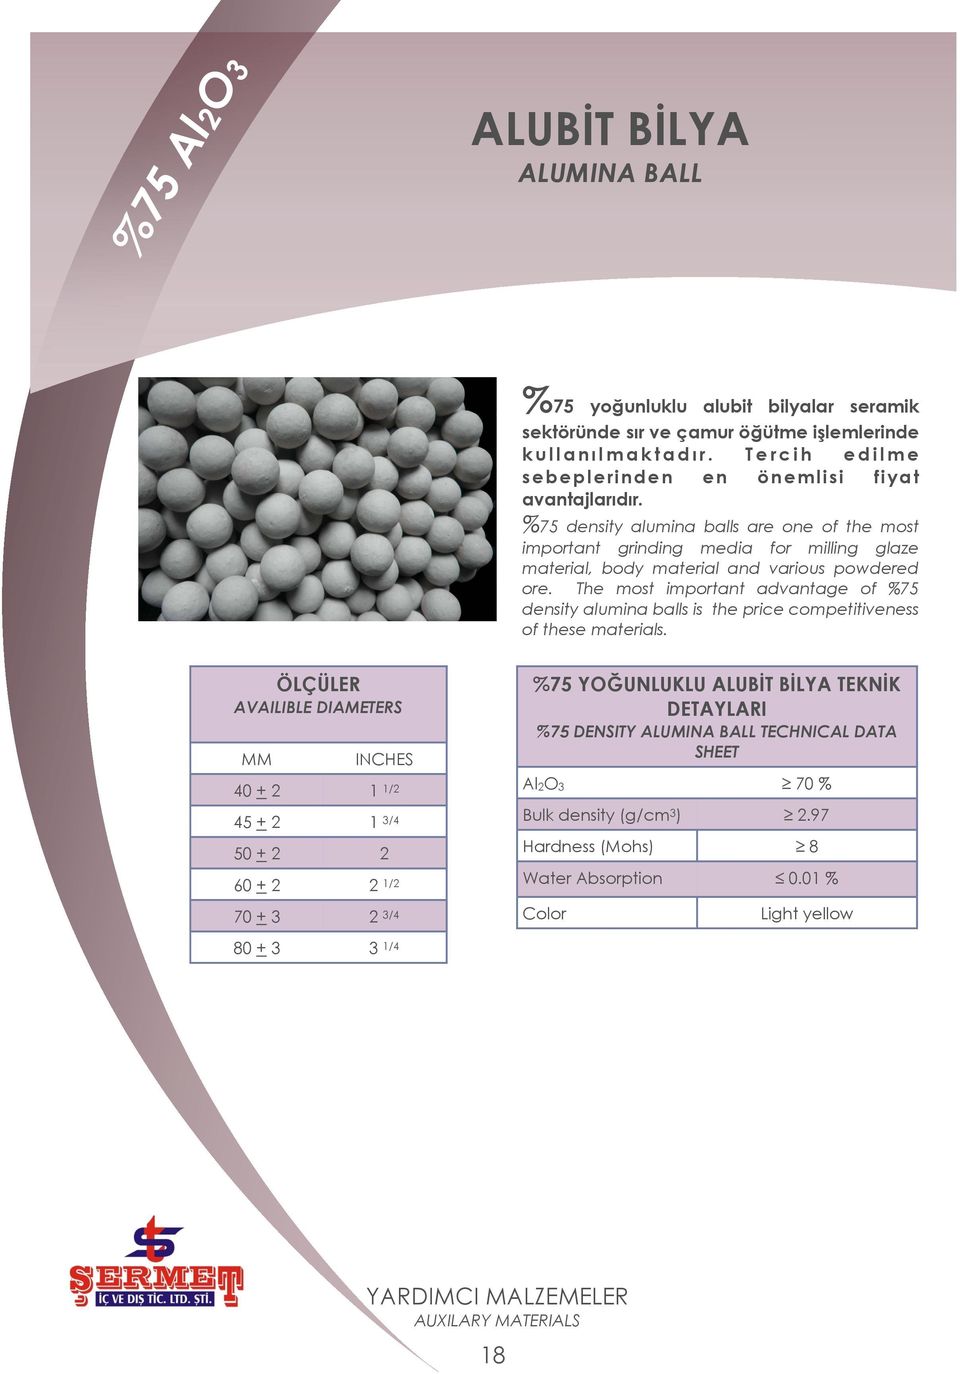 %75 density alumina balls are one of the most important grinding media for milling glaze material, body material and various powdered ore.